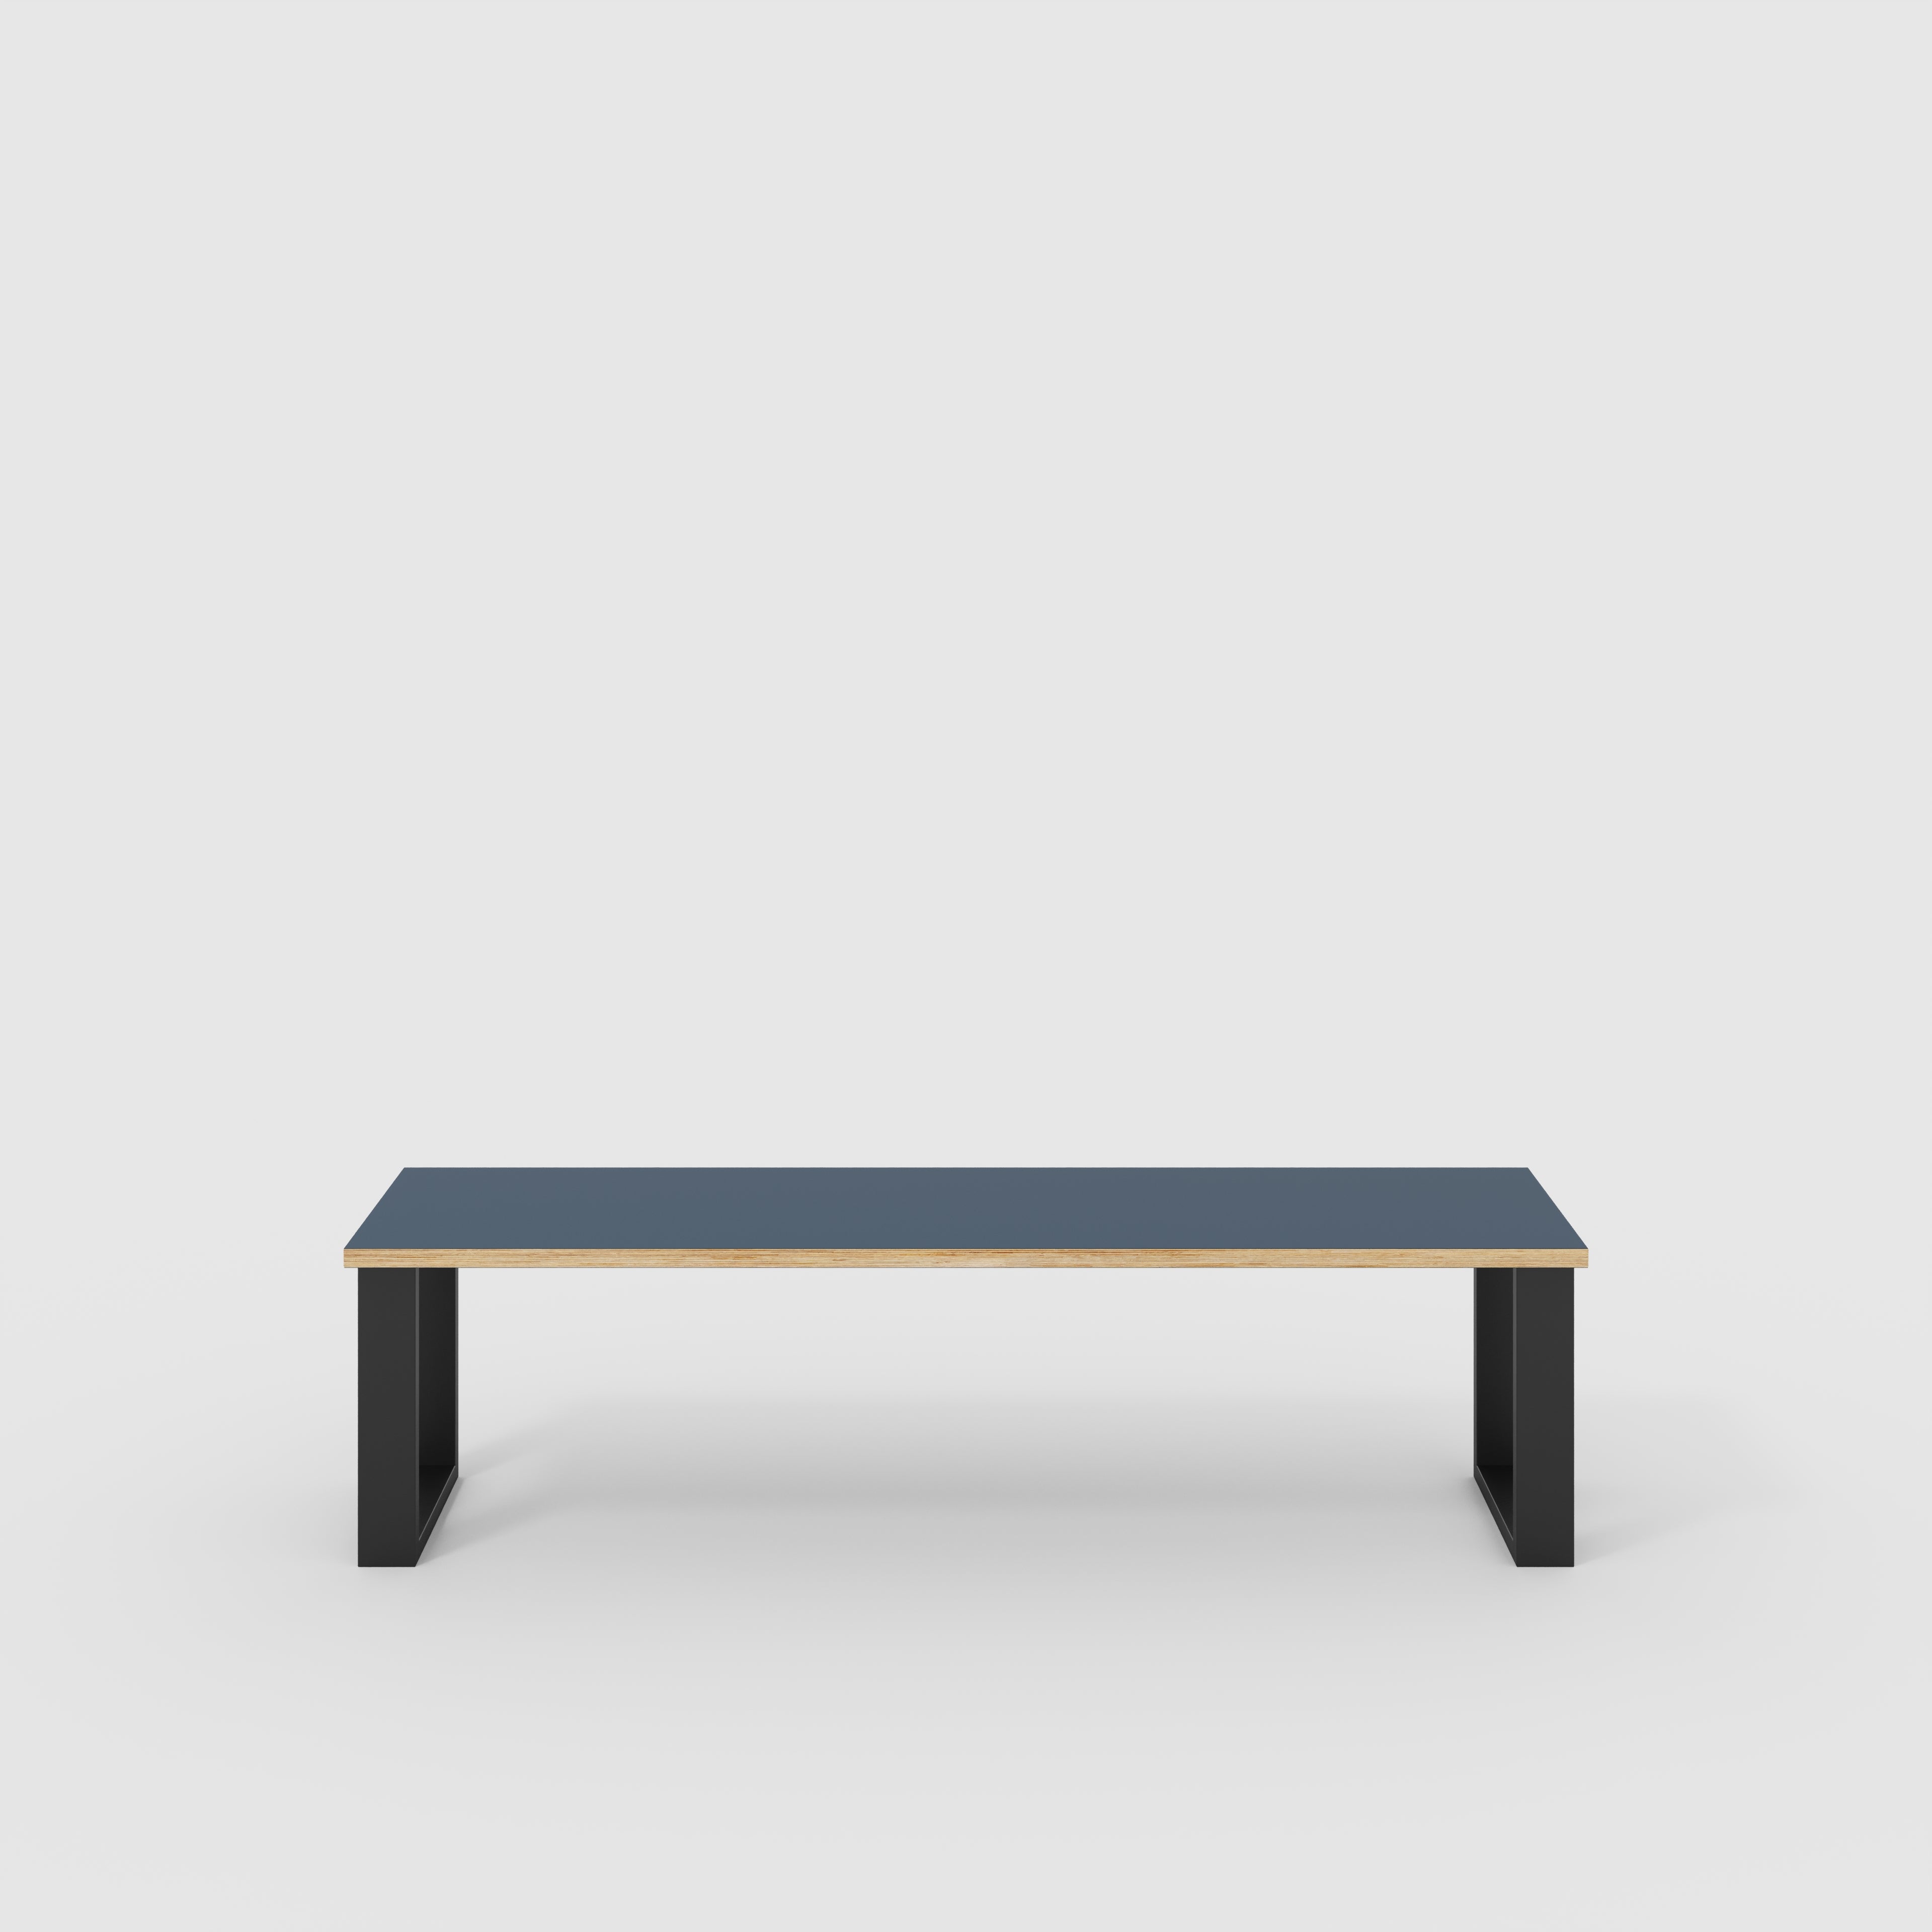 Bench Seat with Black Industrial Legs - Formica Night Sea Blue - 1600(w) x 400(d)